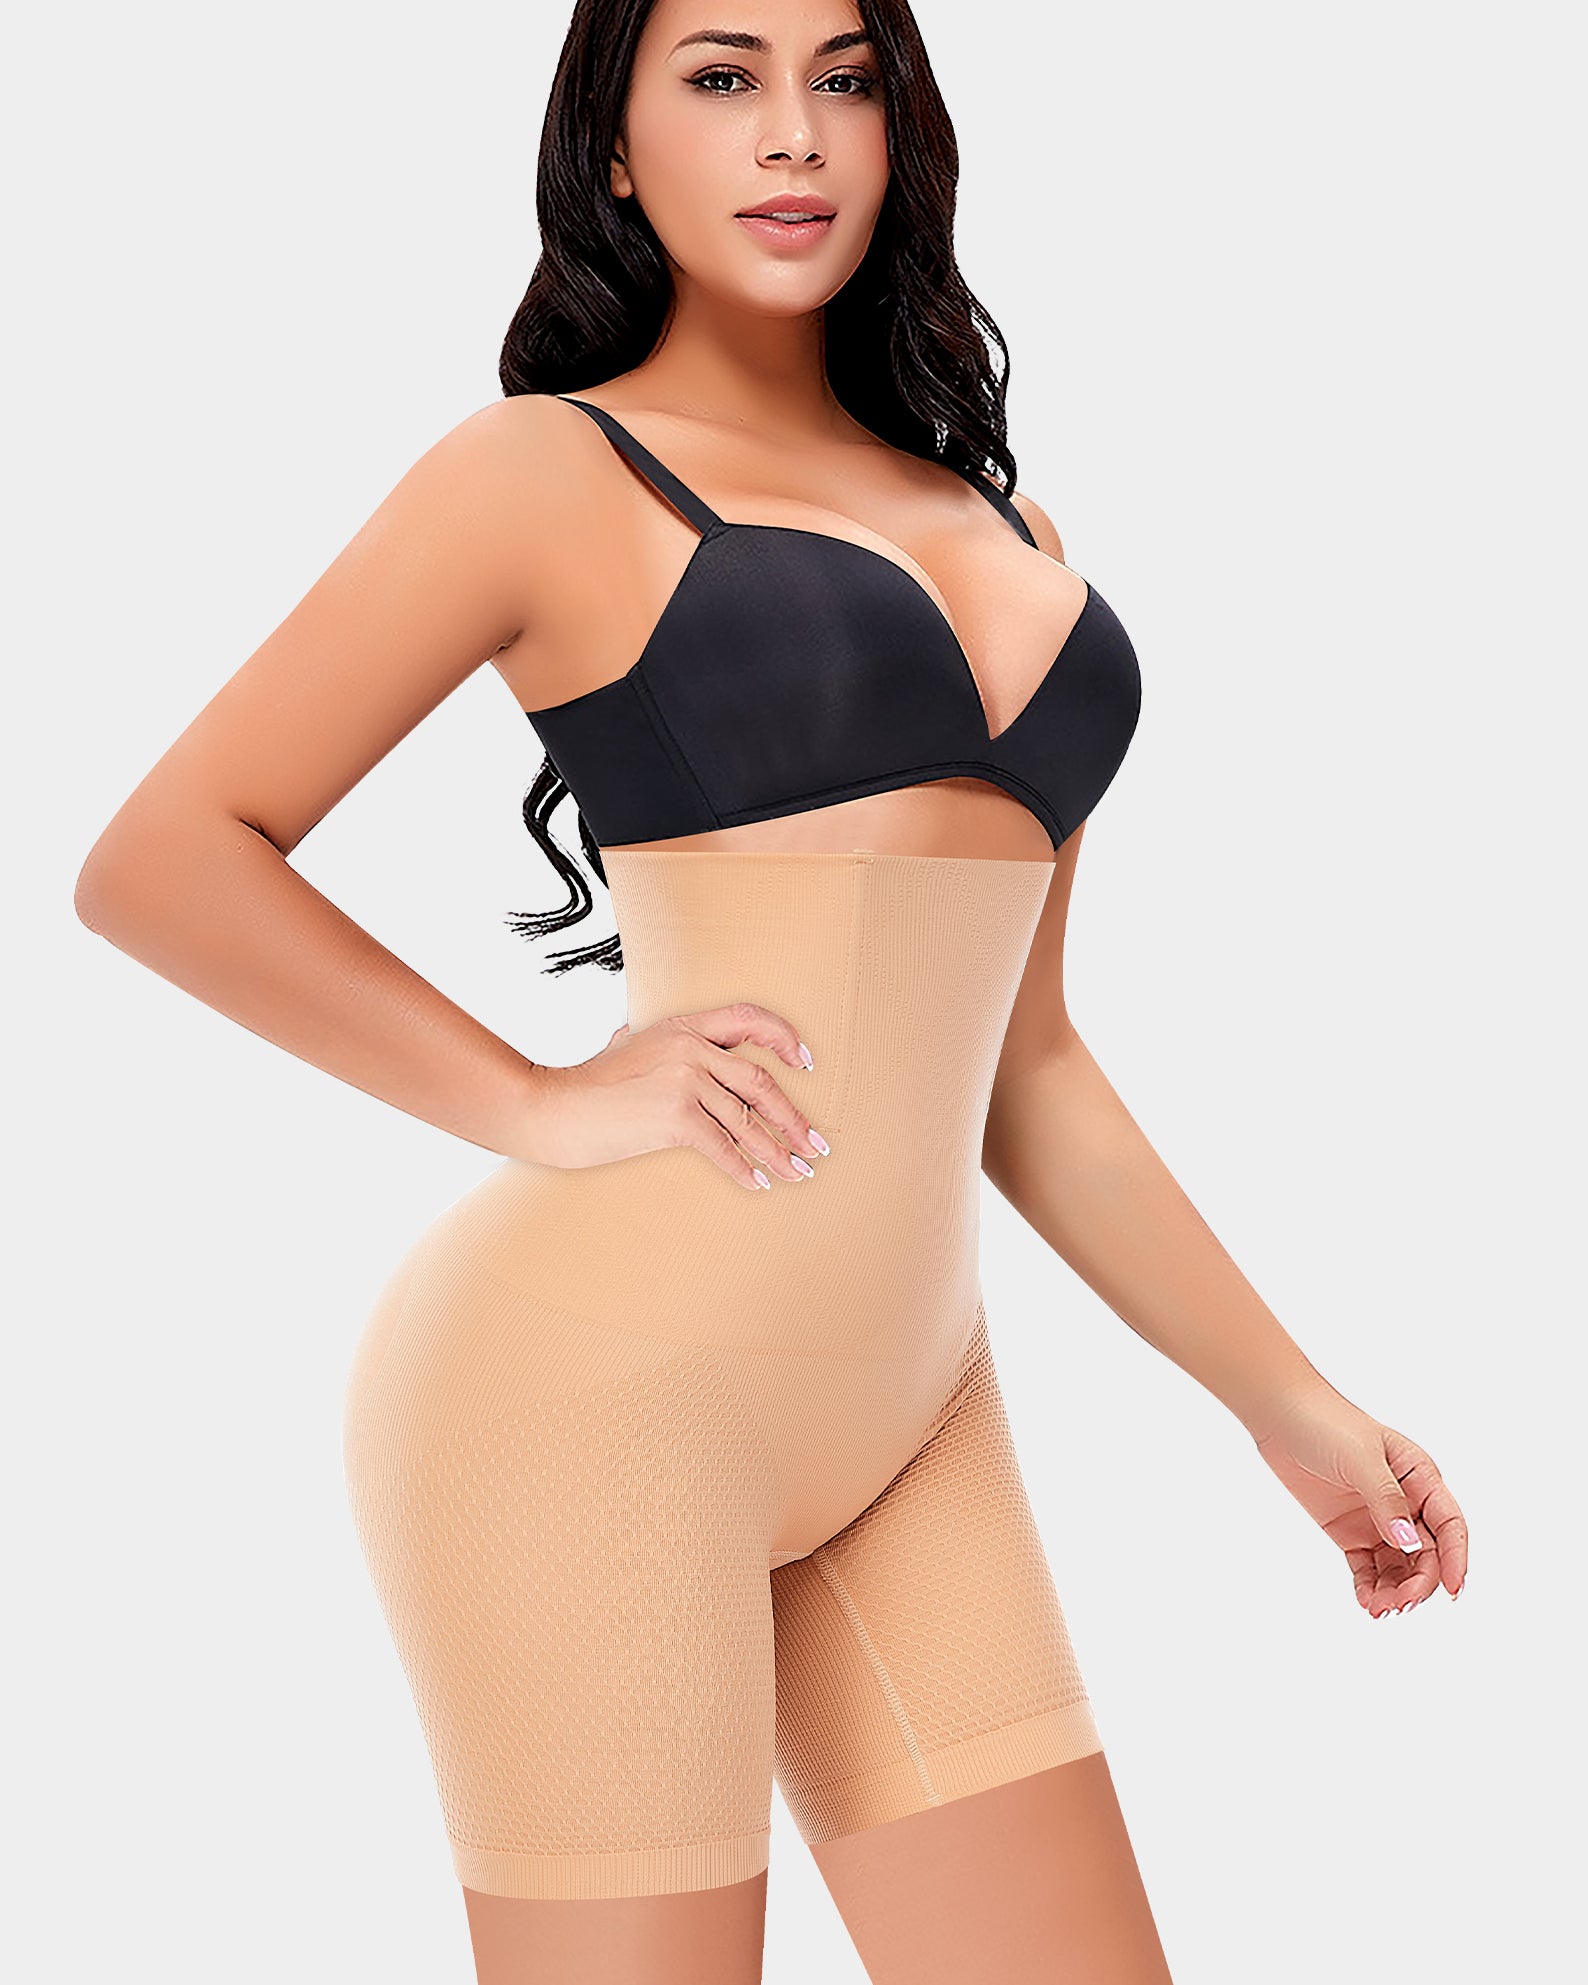 Werena Tummy Control Shapewear Shorts for Women Seamless South Africa